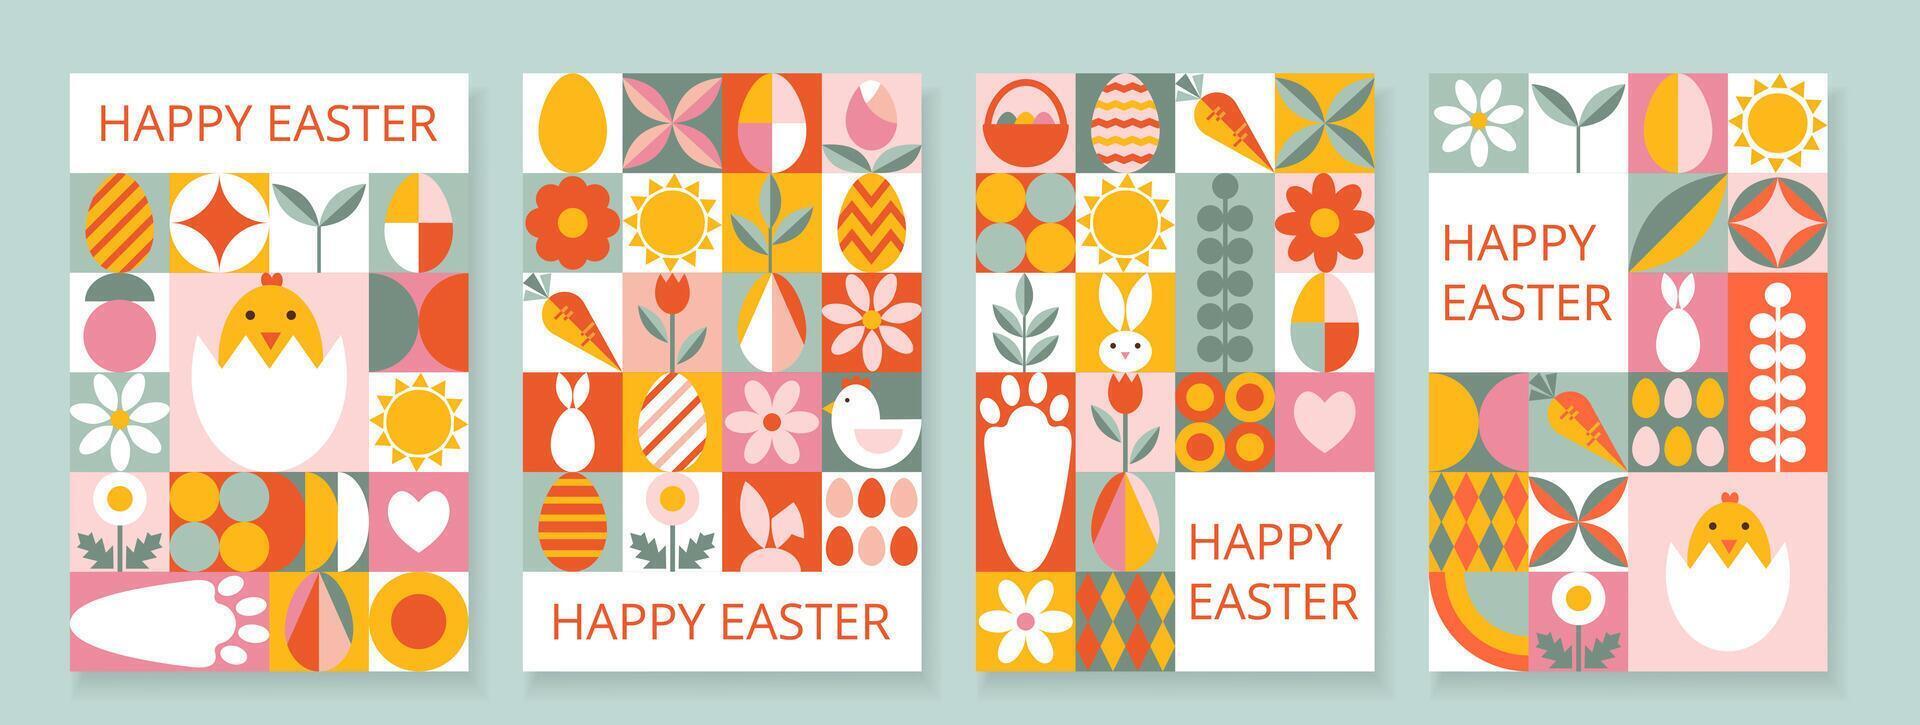 Collection 4 multicolored festive Happy Easter templates for card, poster, flyer, banner, cover. Trendy design with geometric shapes and typography. Bauhaus style. vector